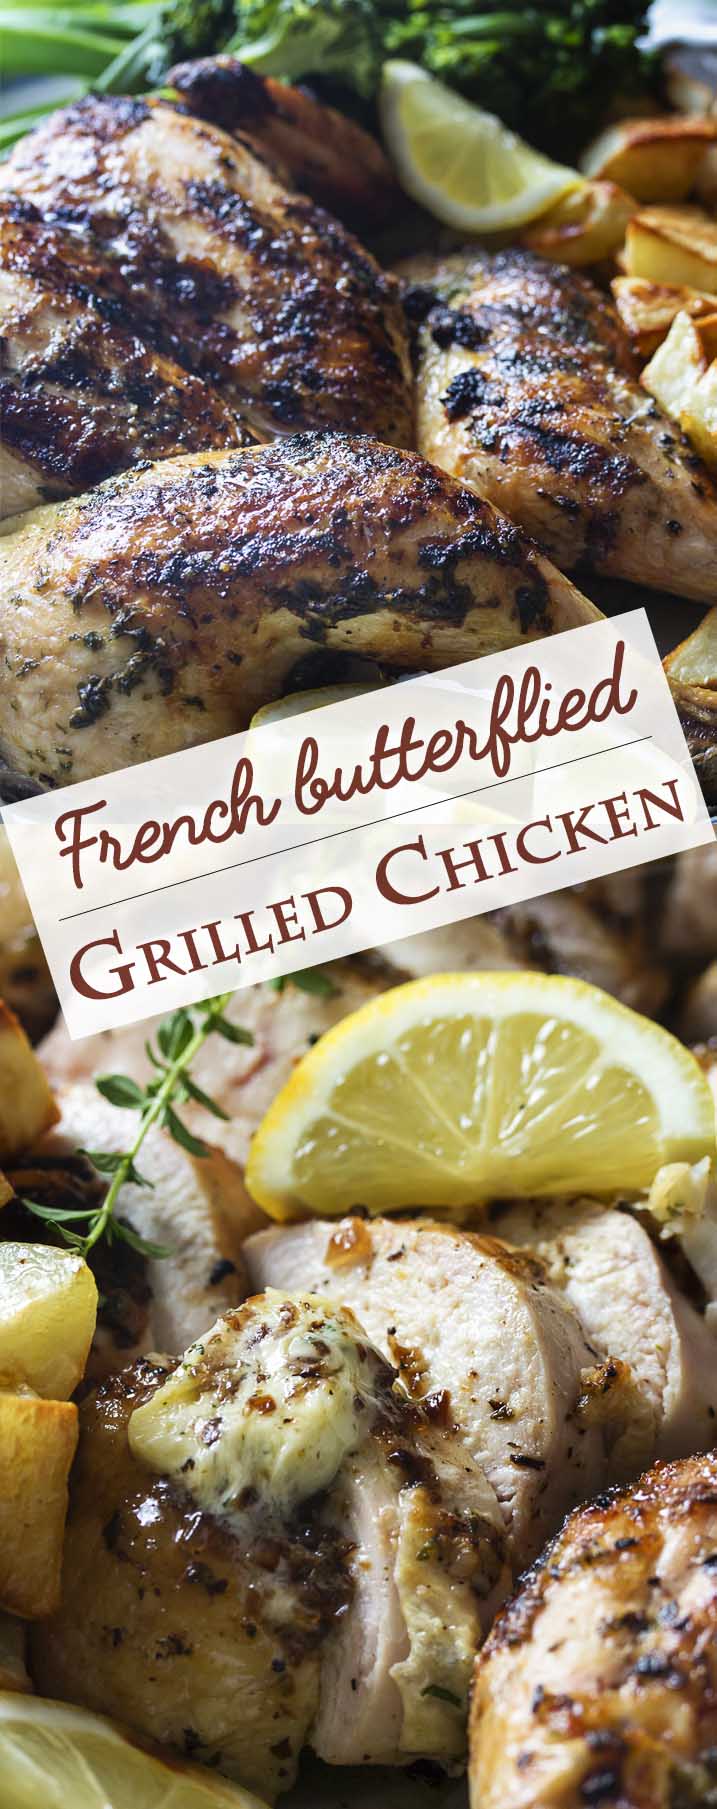 A French herb rub, a sweet and spicy glaze, and a caramelized shallot butter all combine to make a grilled whole chicken full of layered flavors. | justalittlebitofbacon.com